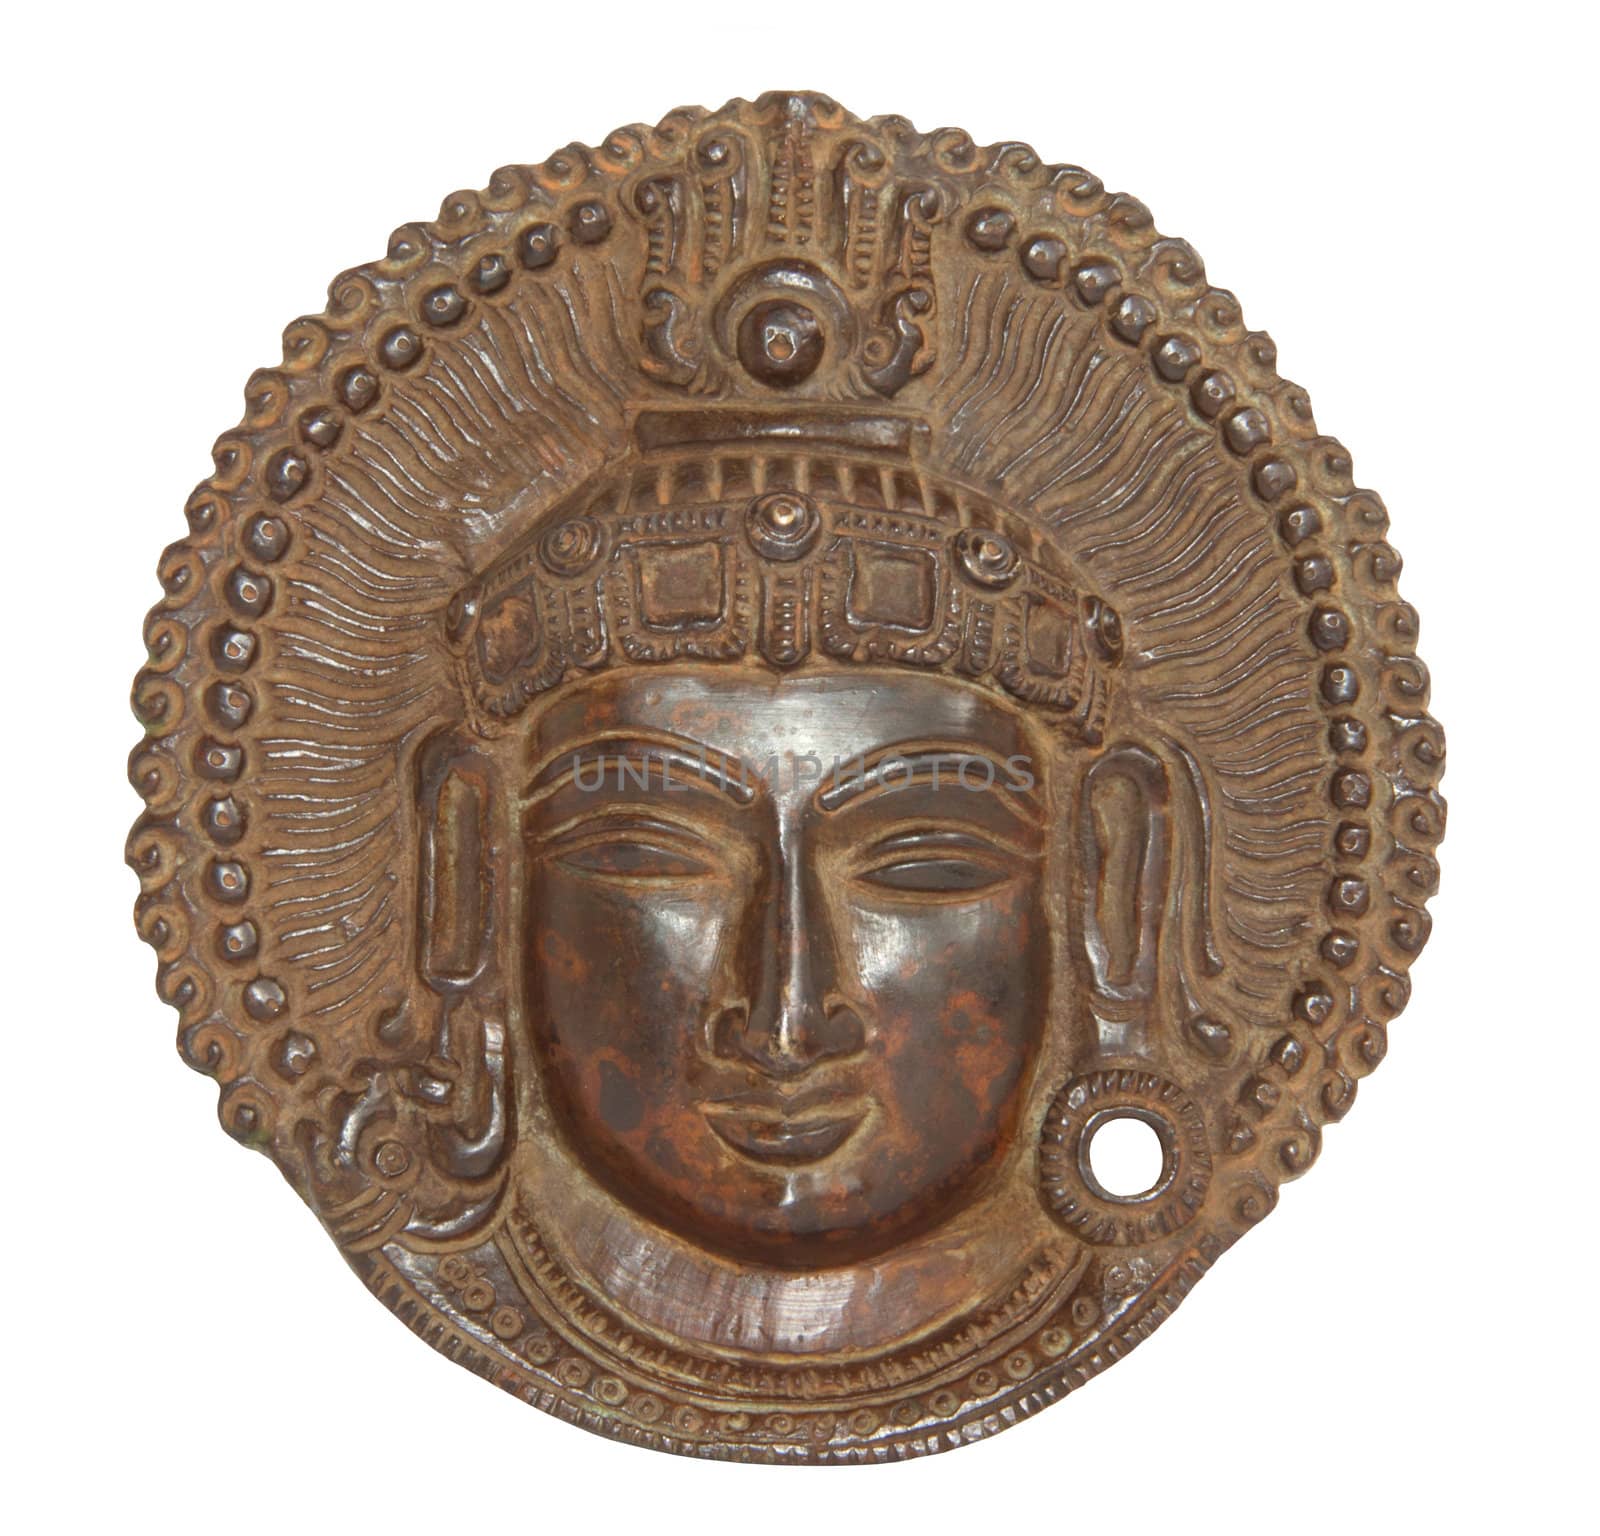 Metal panel with the image buddha on a white background